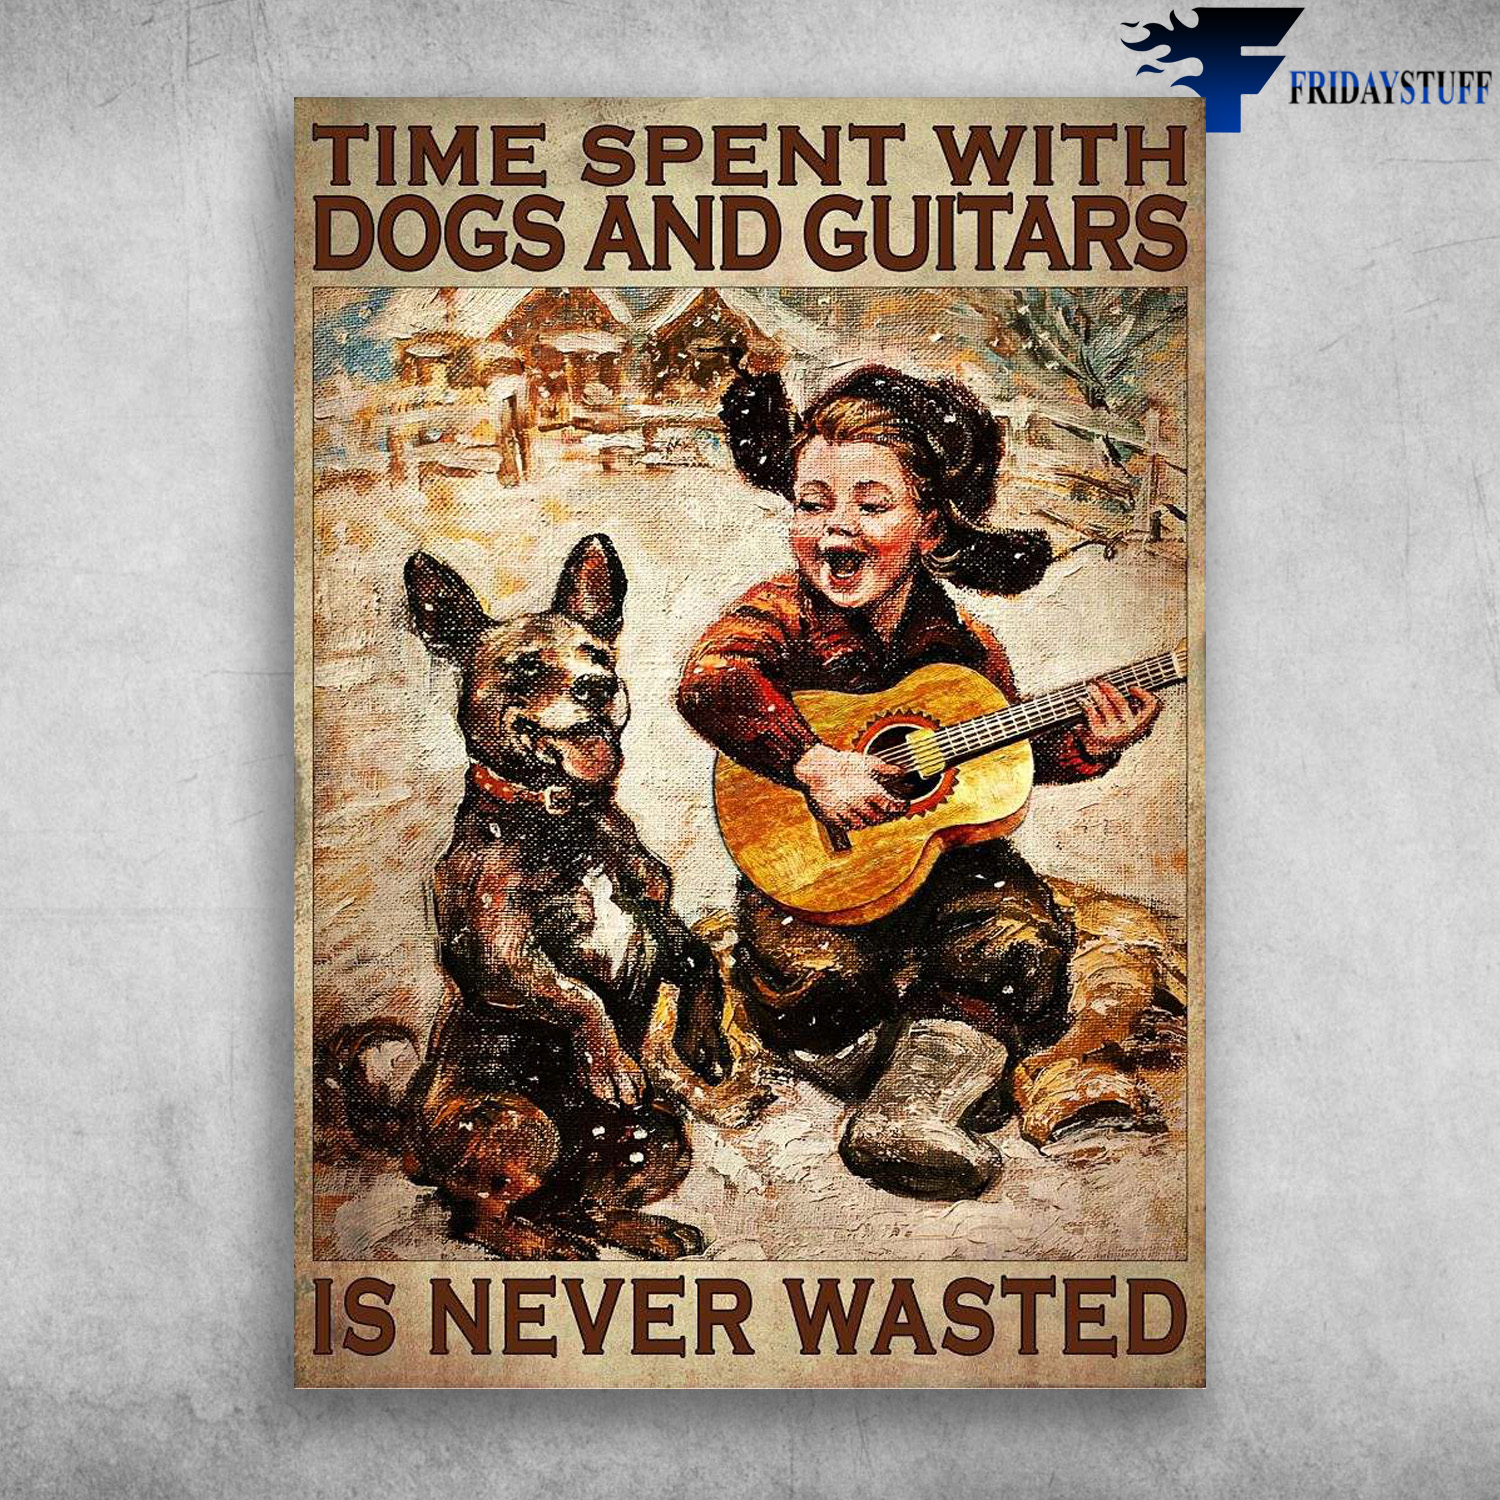 Boy Guiter Dog - Time Spent With Dogs And Guitars, Is Never Wasted